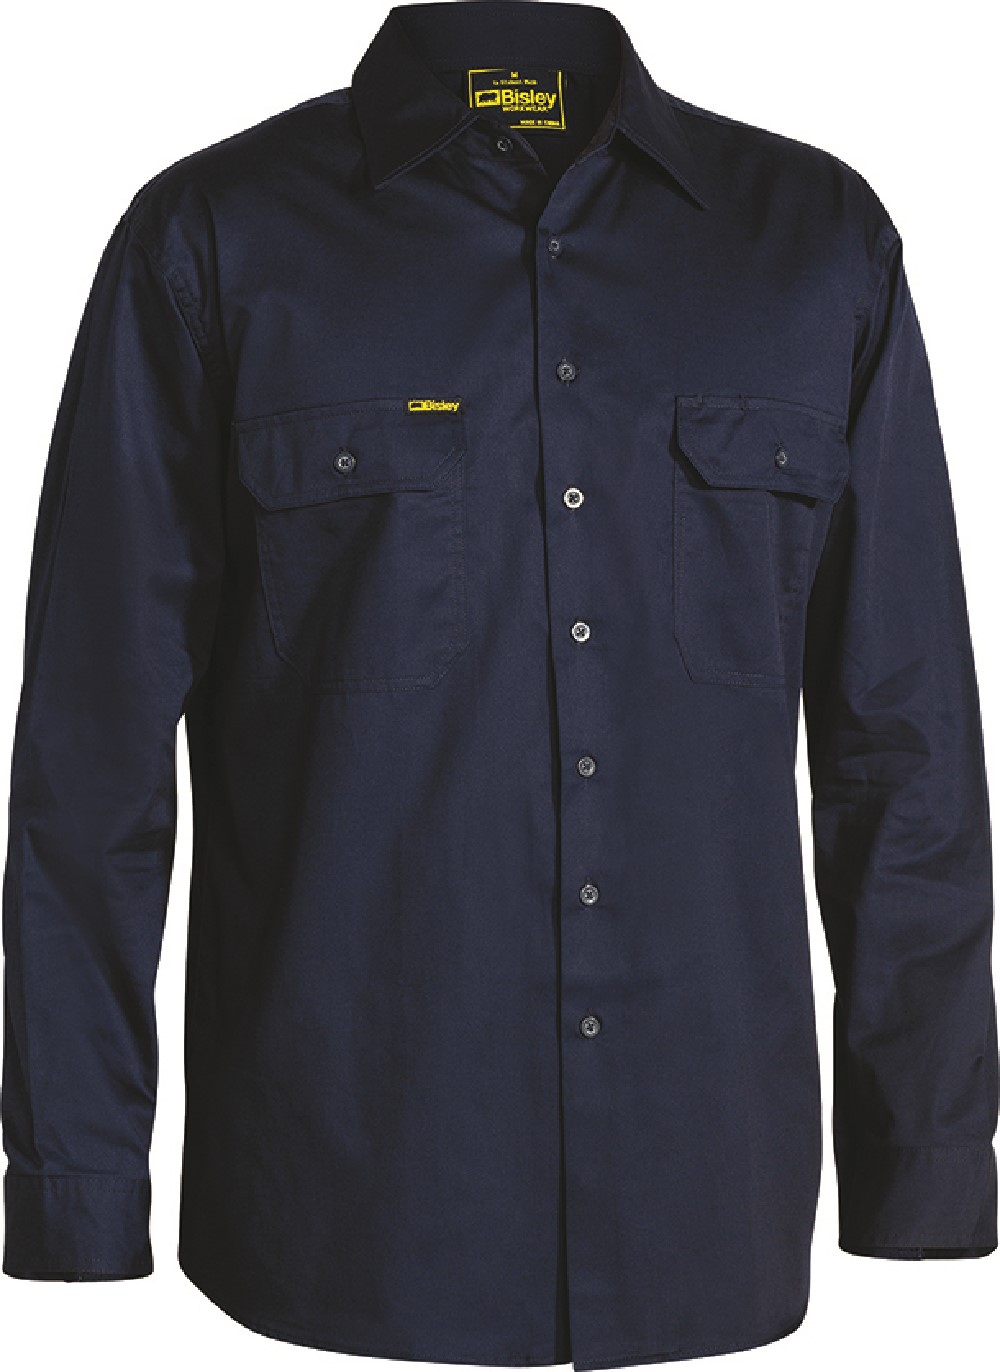 SHIRT L/S COOLWEIGHT C/DRILL NAVY SIZE 2XL